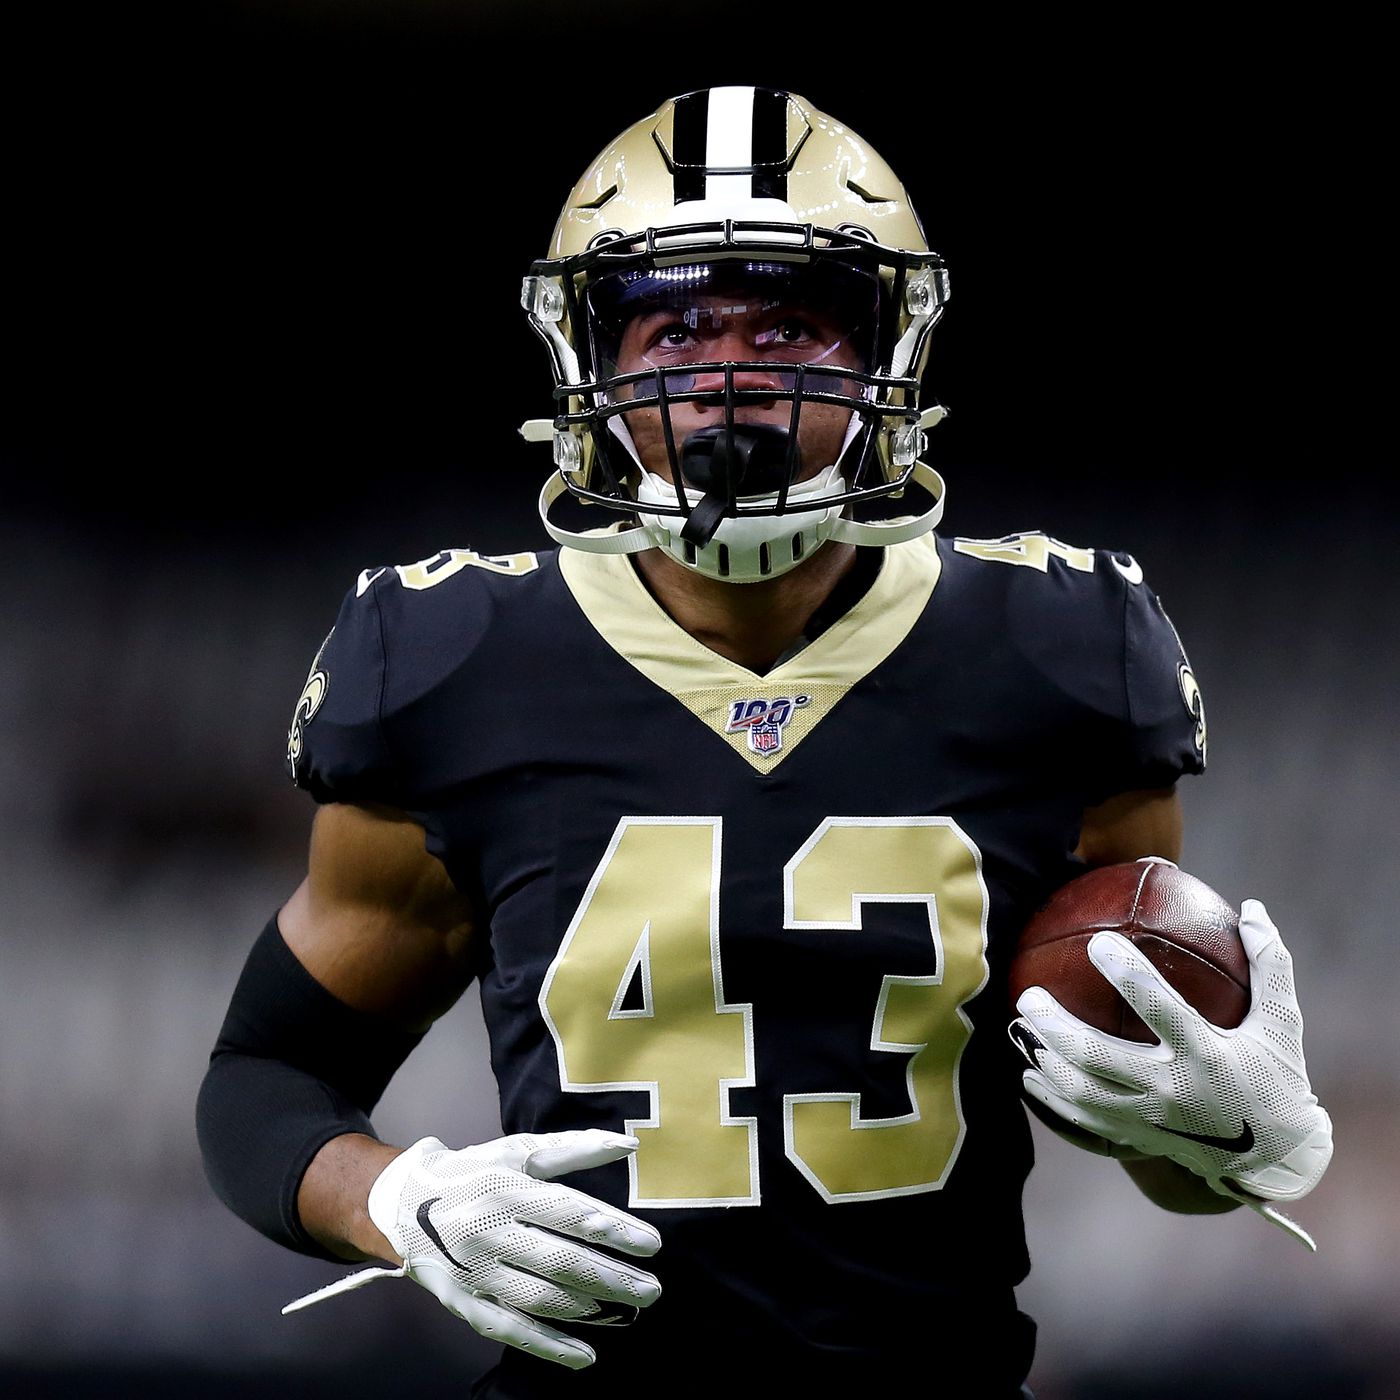 Marcus Williams, New Orleans Saints (Source: Canal Street Chronicles)